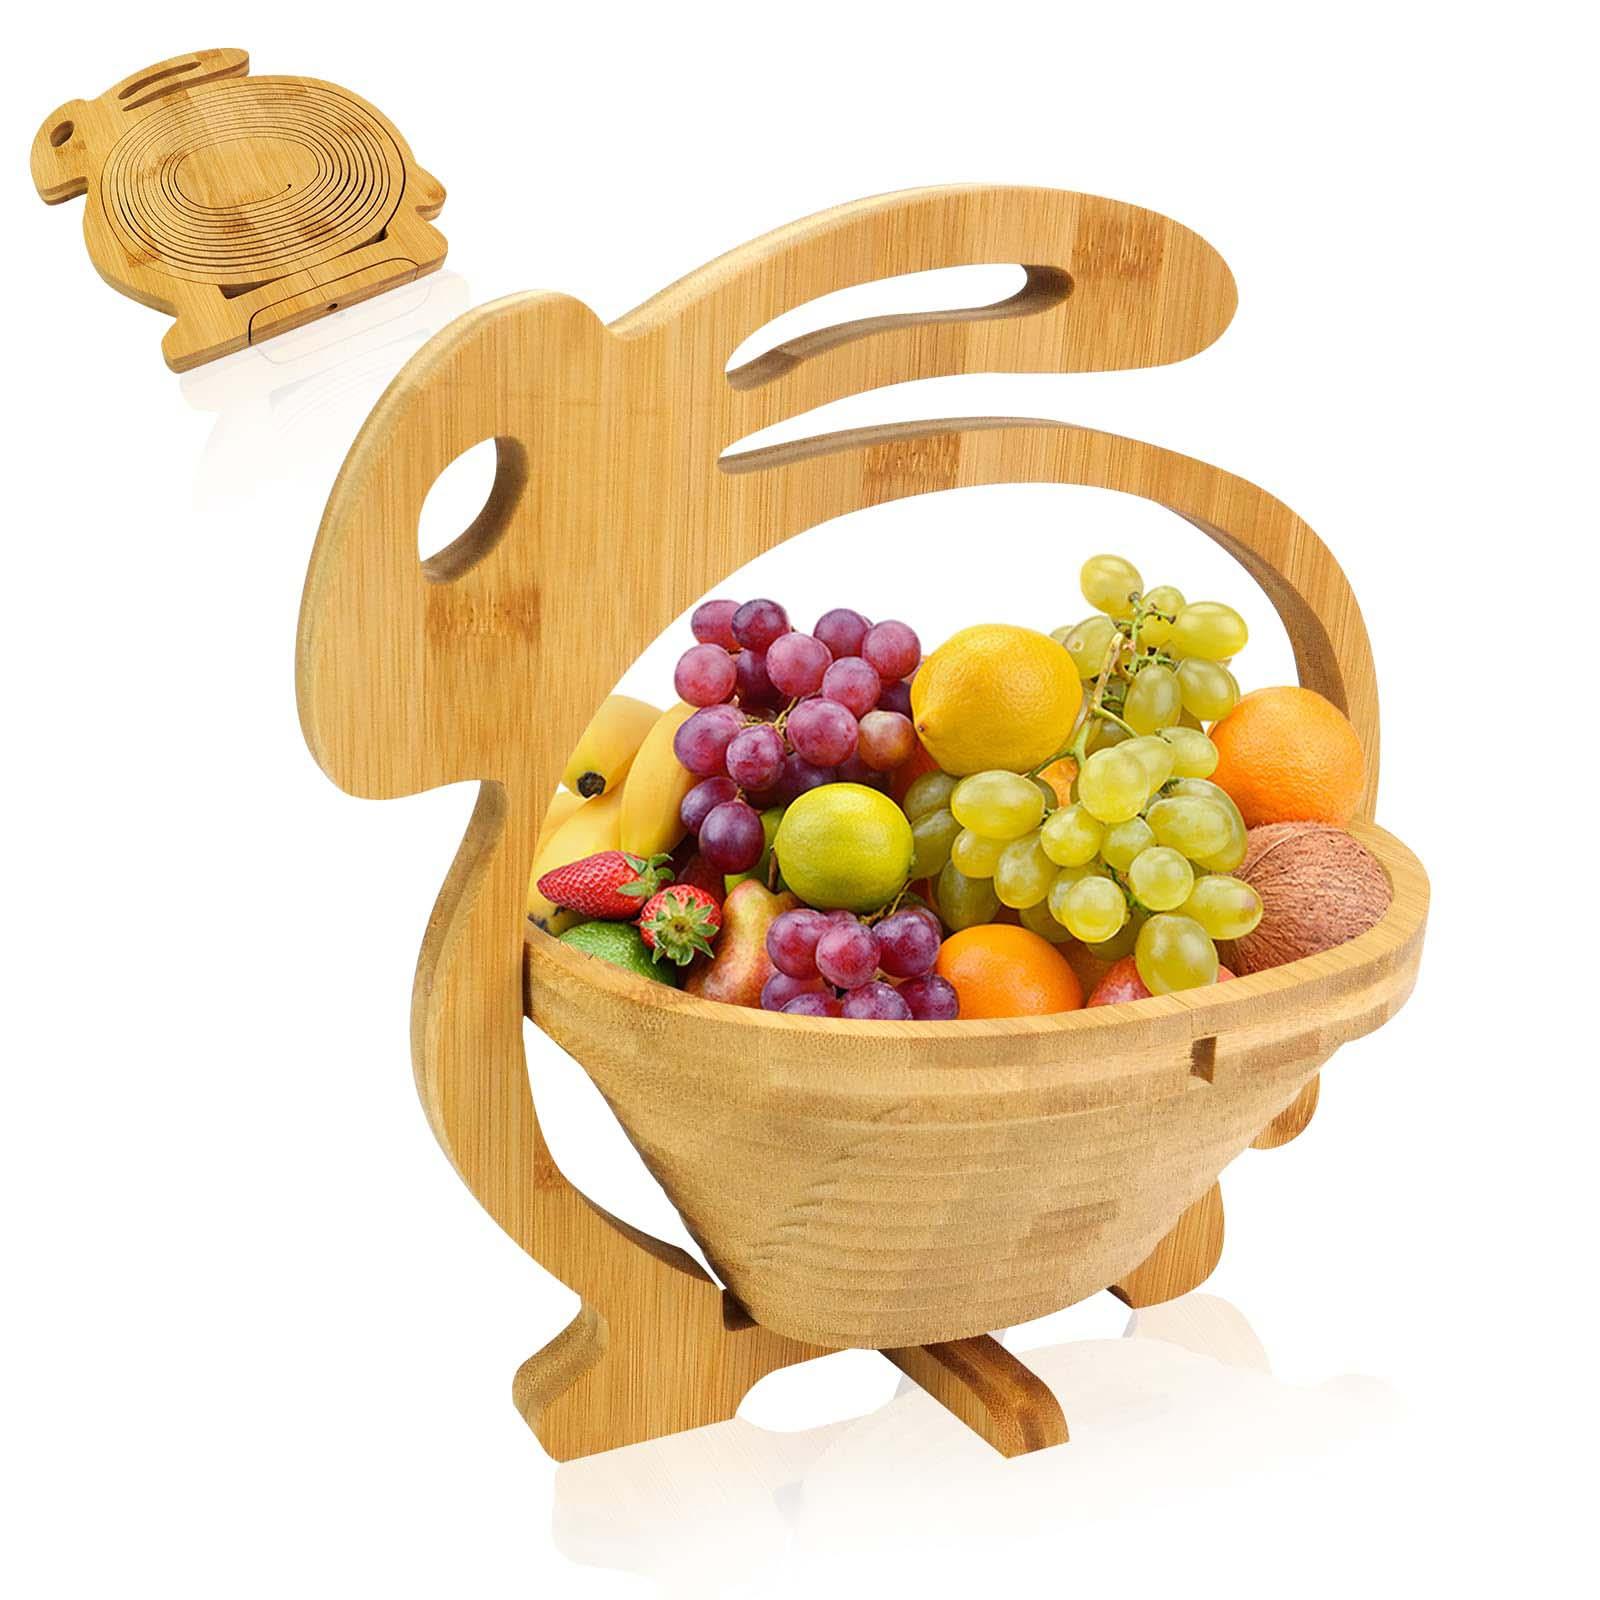 Fruit Basket Collapsible Snack Storage Tray Decorative for Home Kitchen rabbit